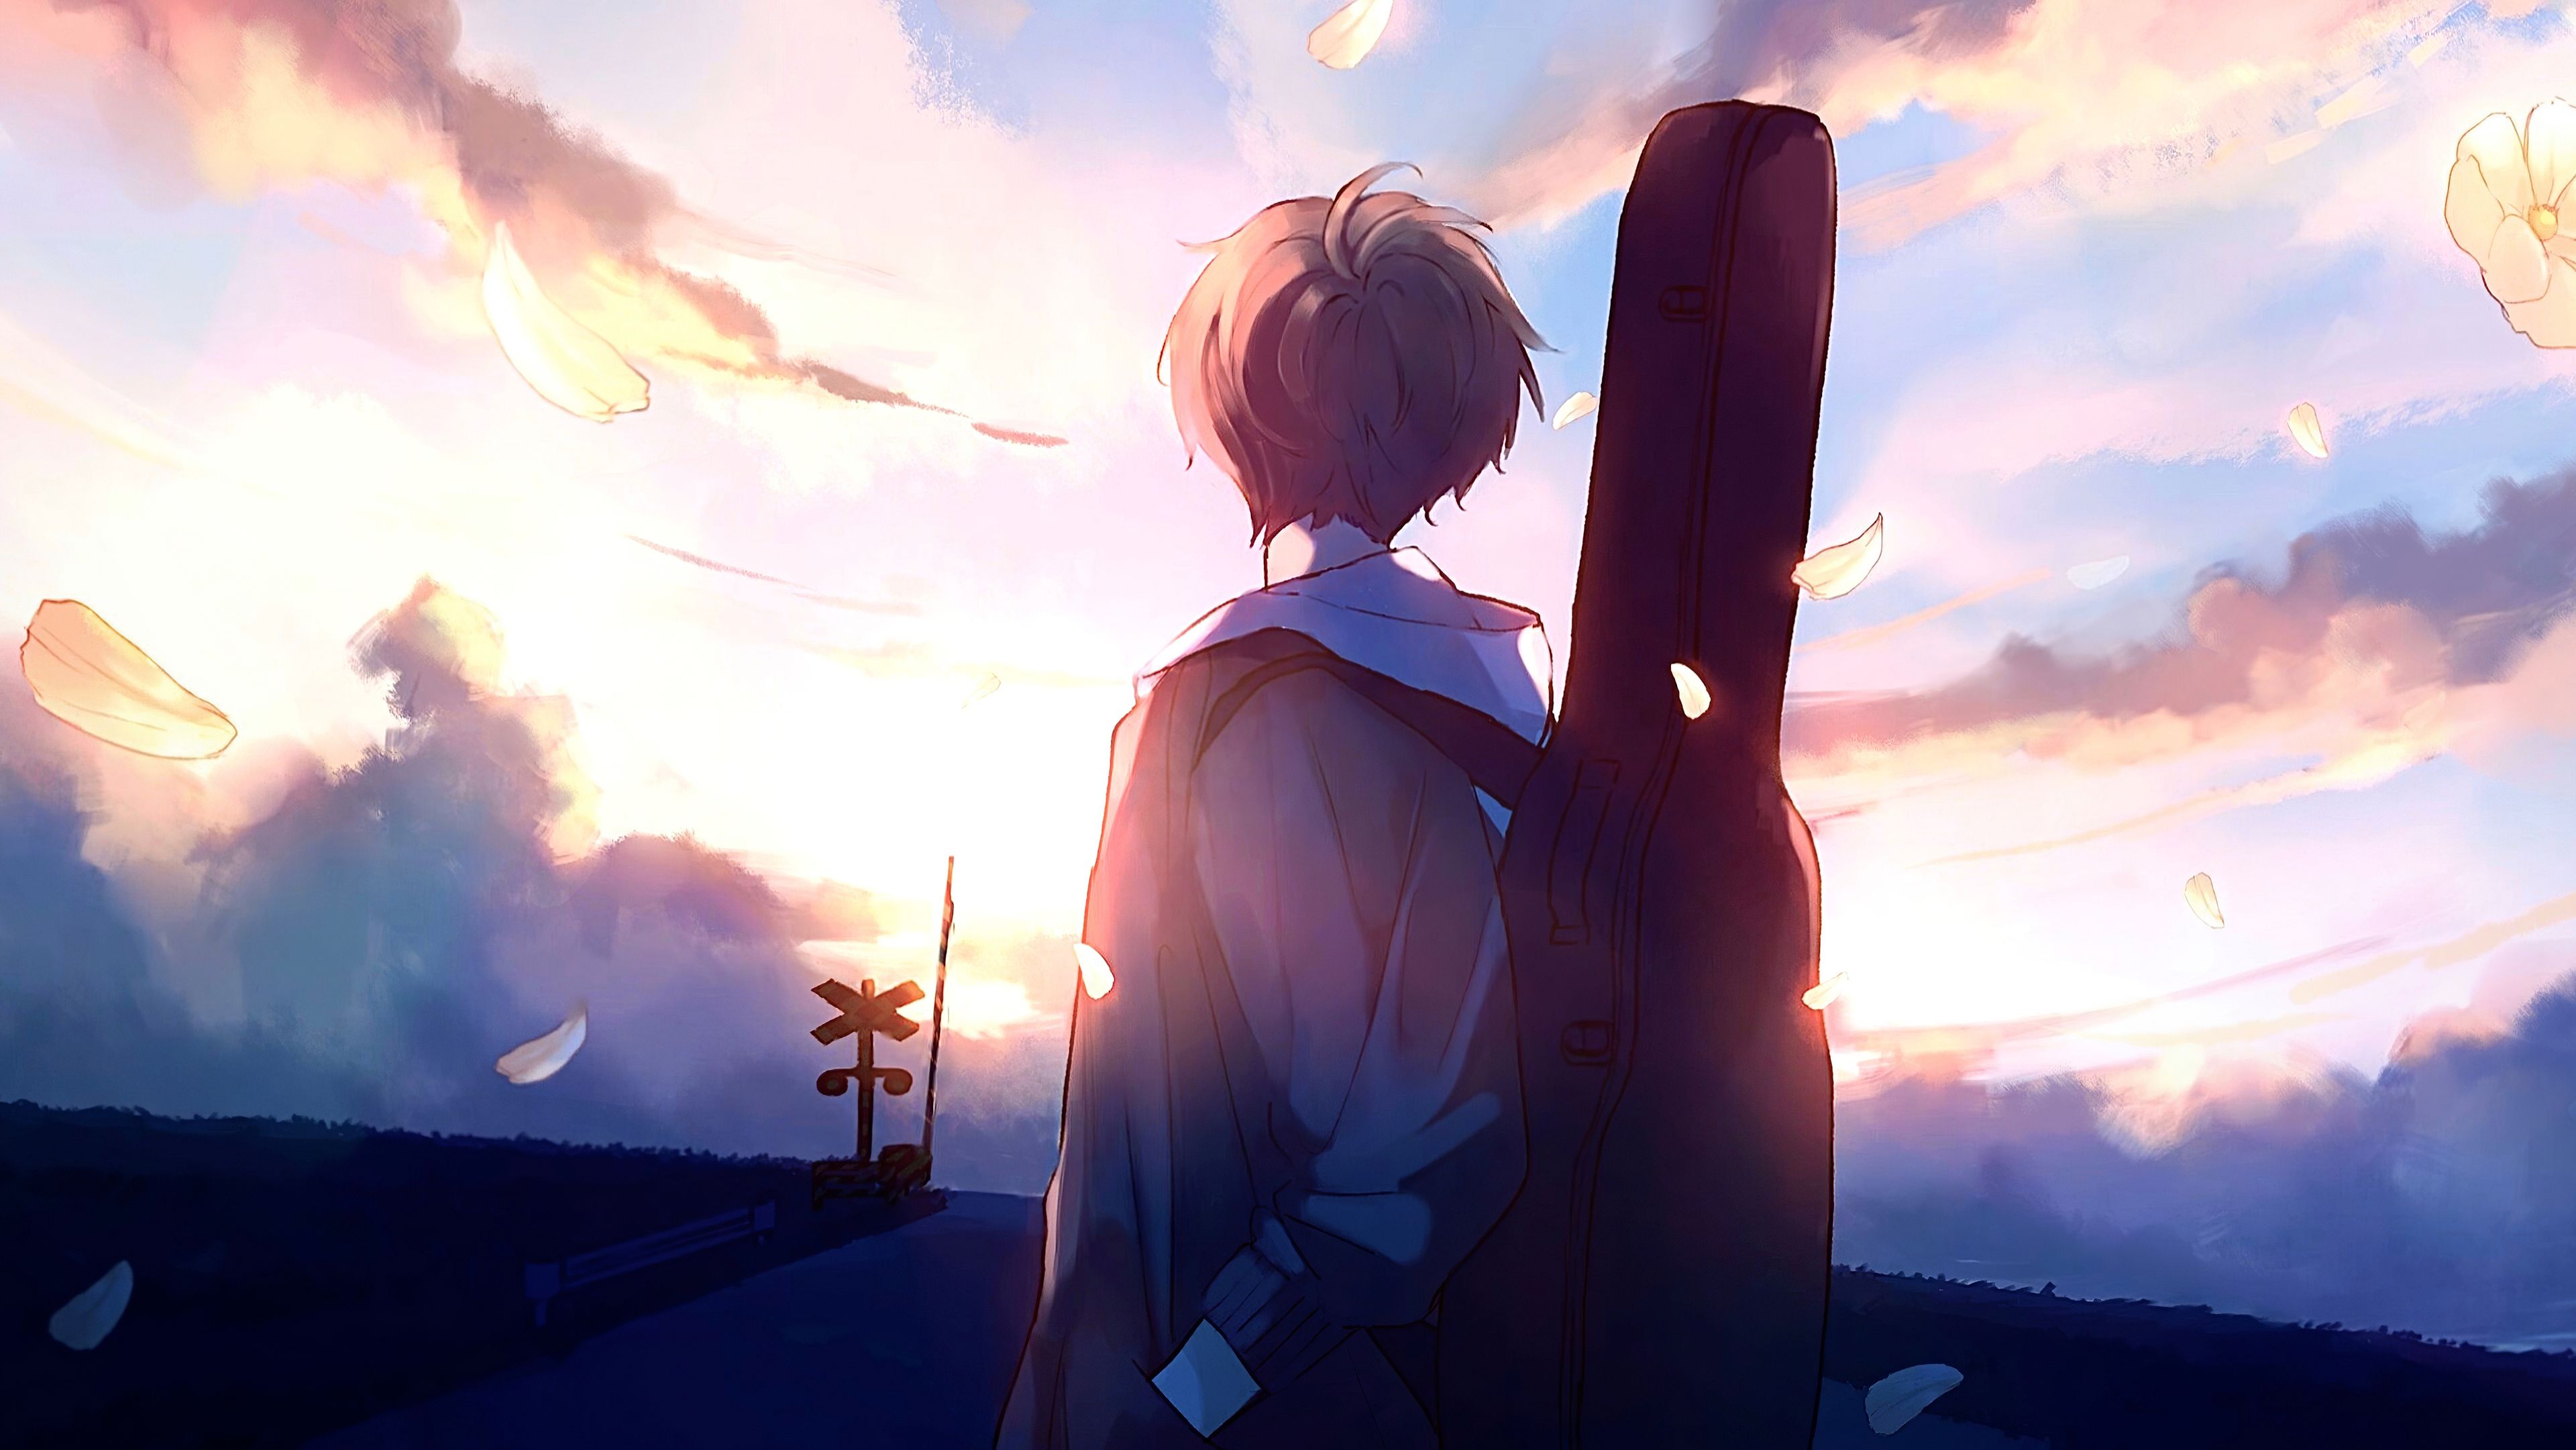 Anime Boy Guitar Painting, HD Anime, 4k Wallpaper, Image, Background, Photo and Picture